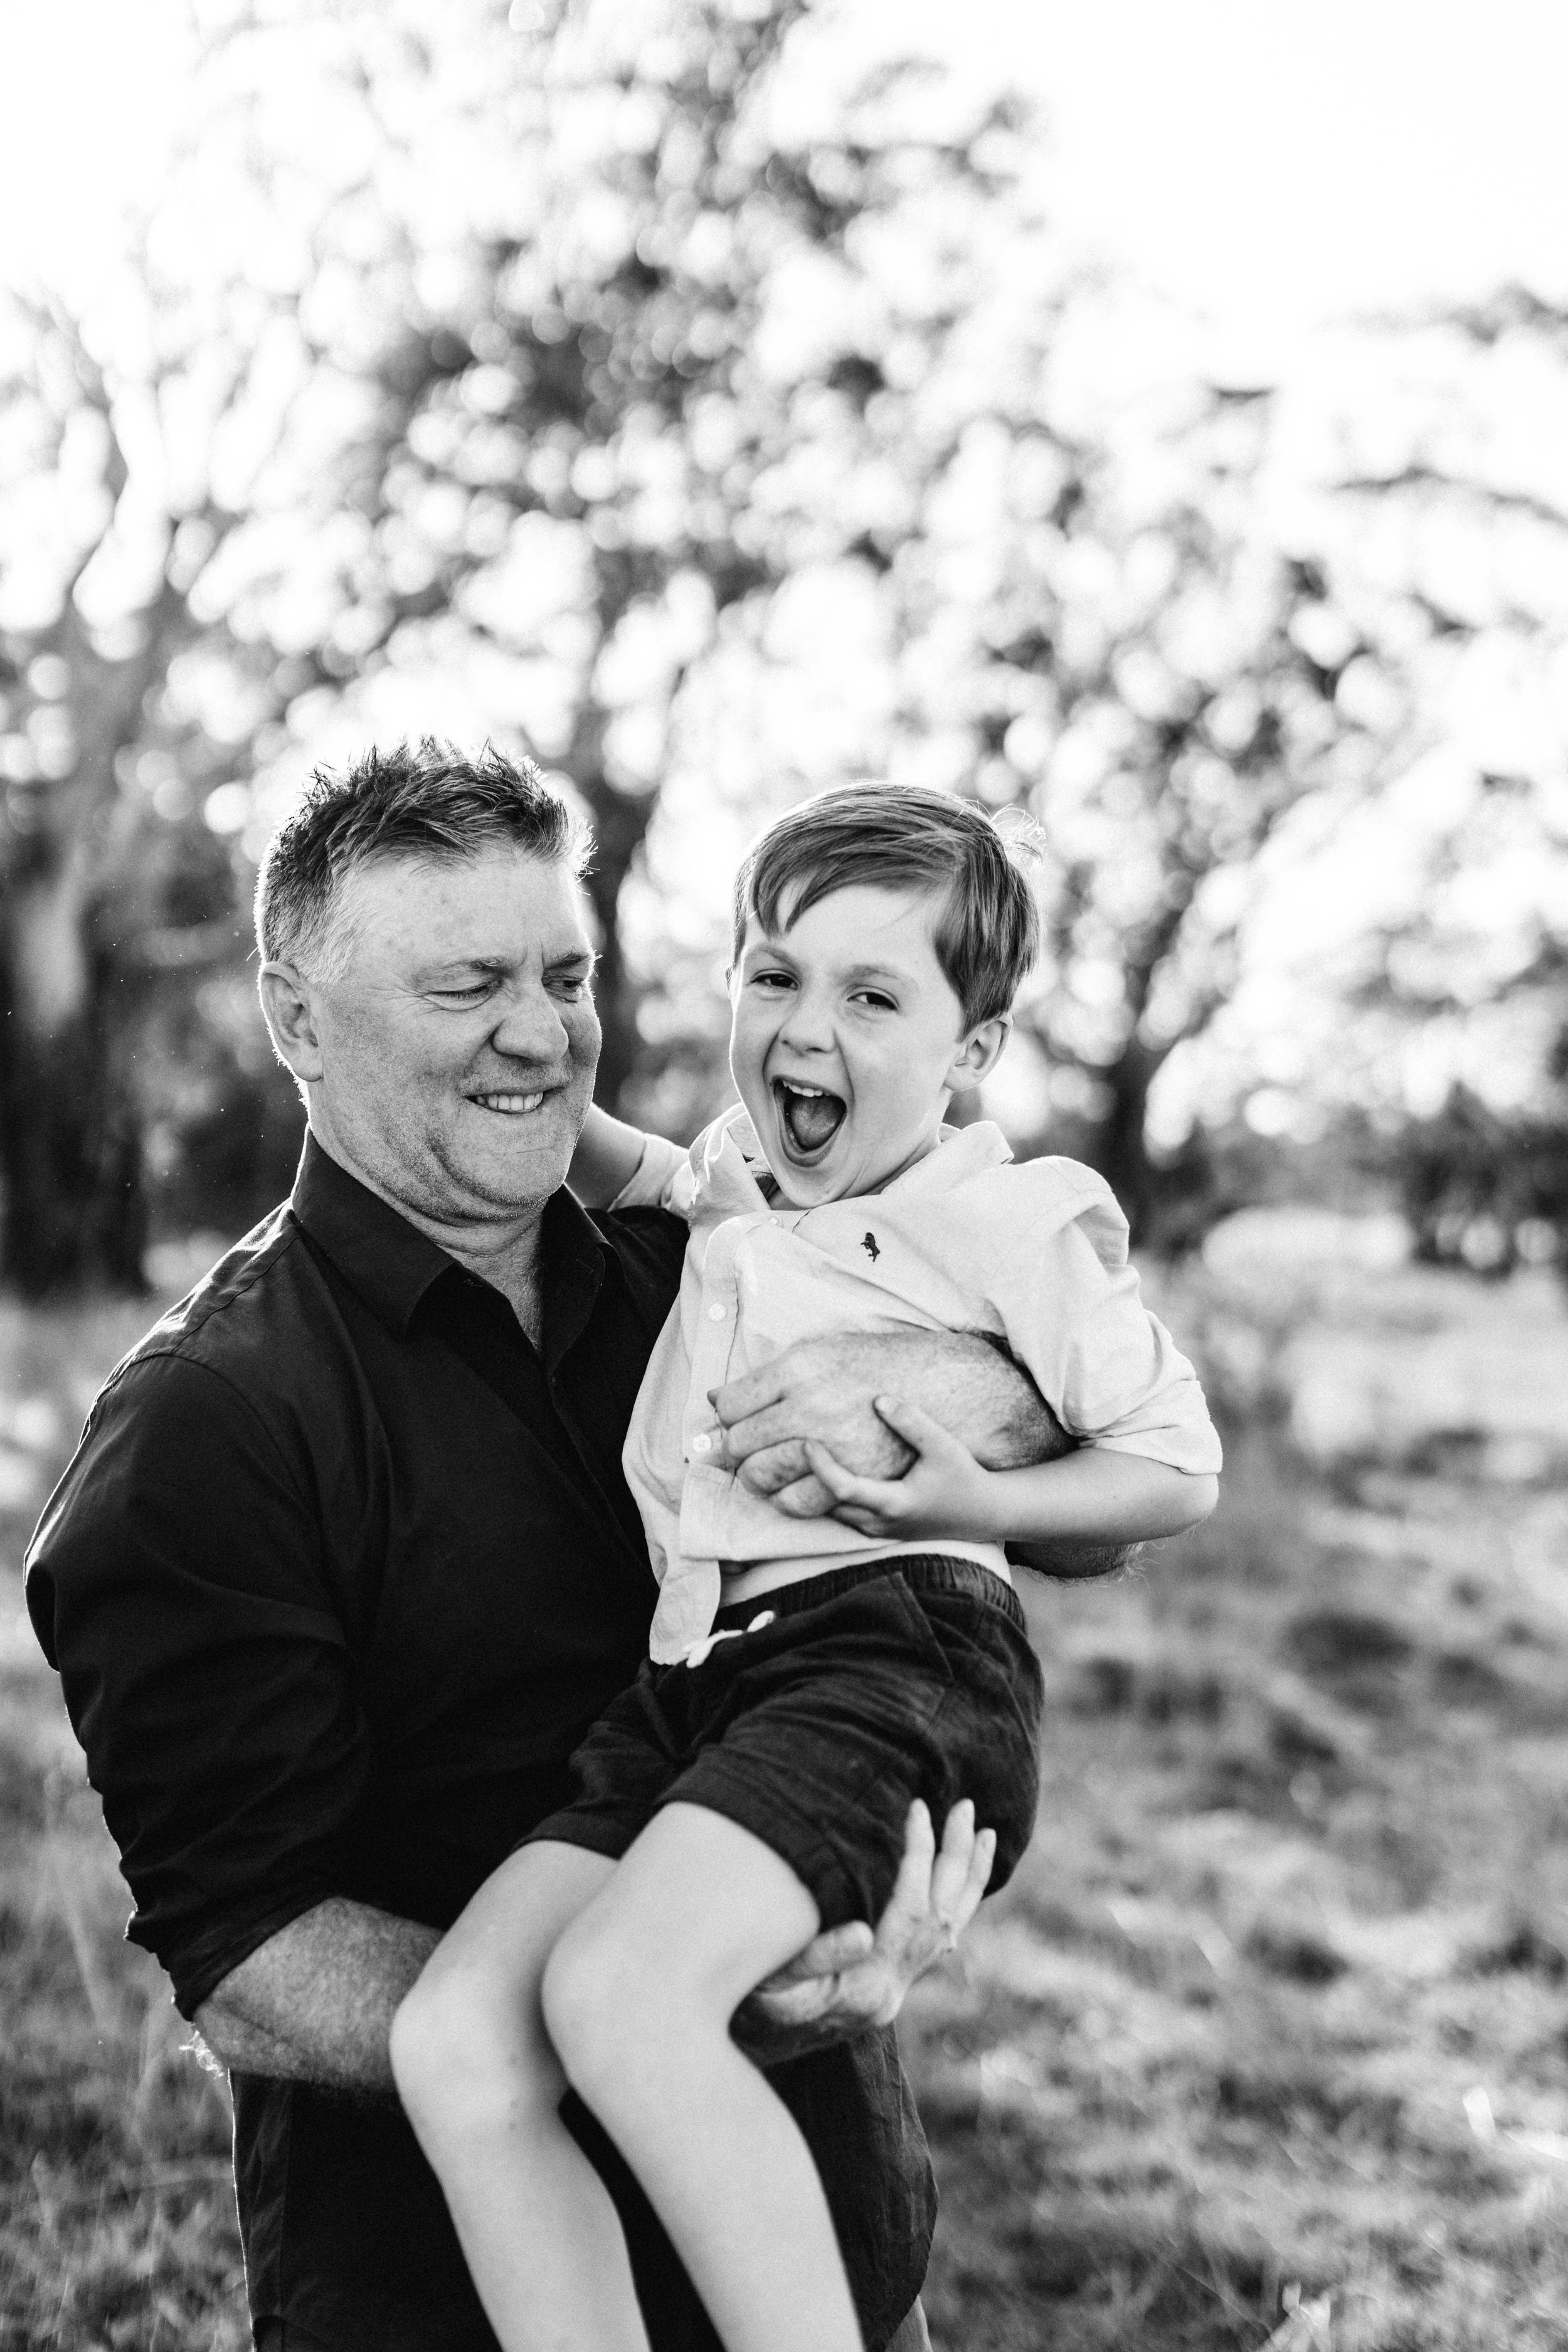 durney-family-exeter-southern-highlands-bowral-inhome-family-lifestyle-wollondilly-camden-macarthur-sydney-photography-www.emilyobrienphotography.net-30.jpg